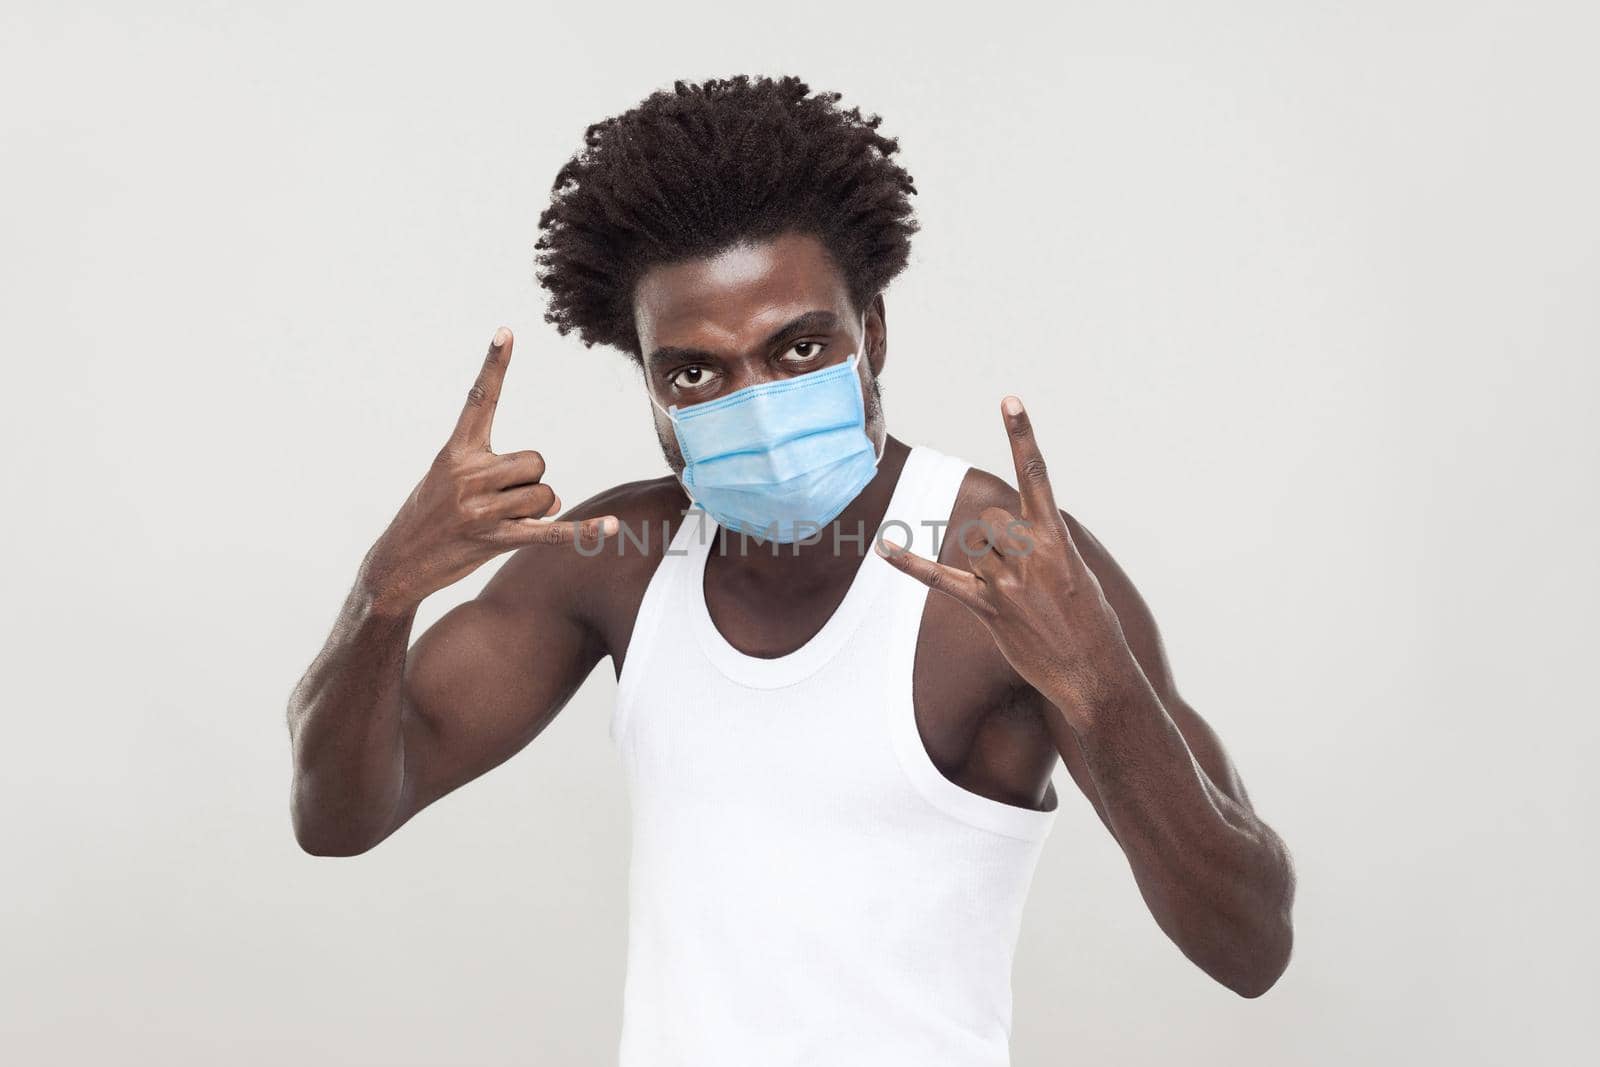 Portrait of young man wearing white shirt with surgical medical mask standing with rock horns gesture and looking at camera. indoor studio shot isolated on gray background.